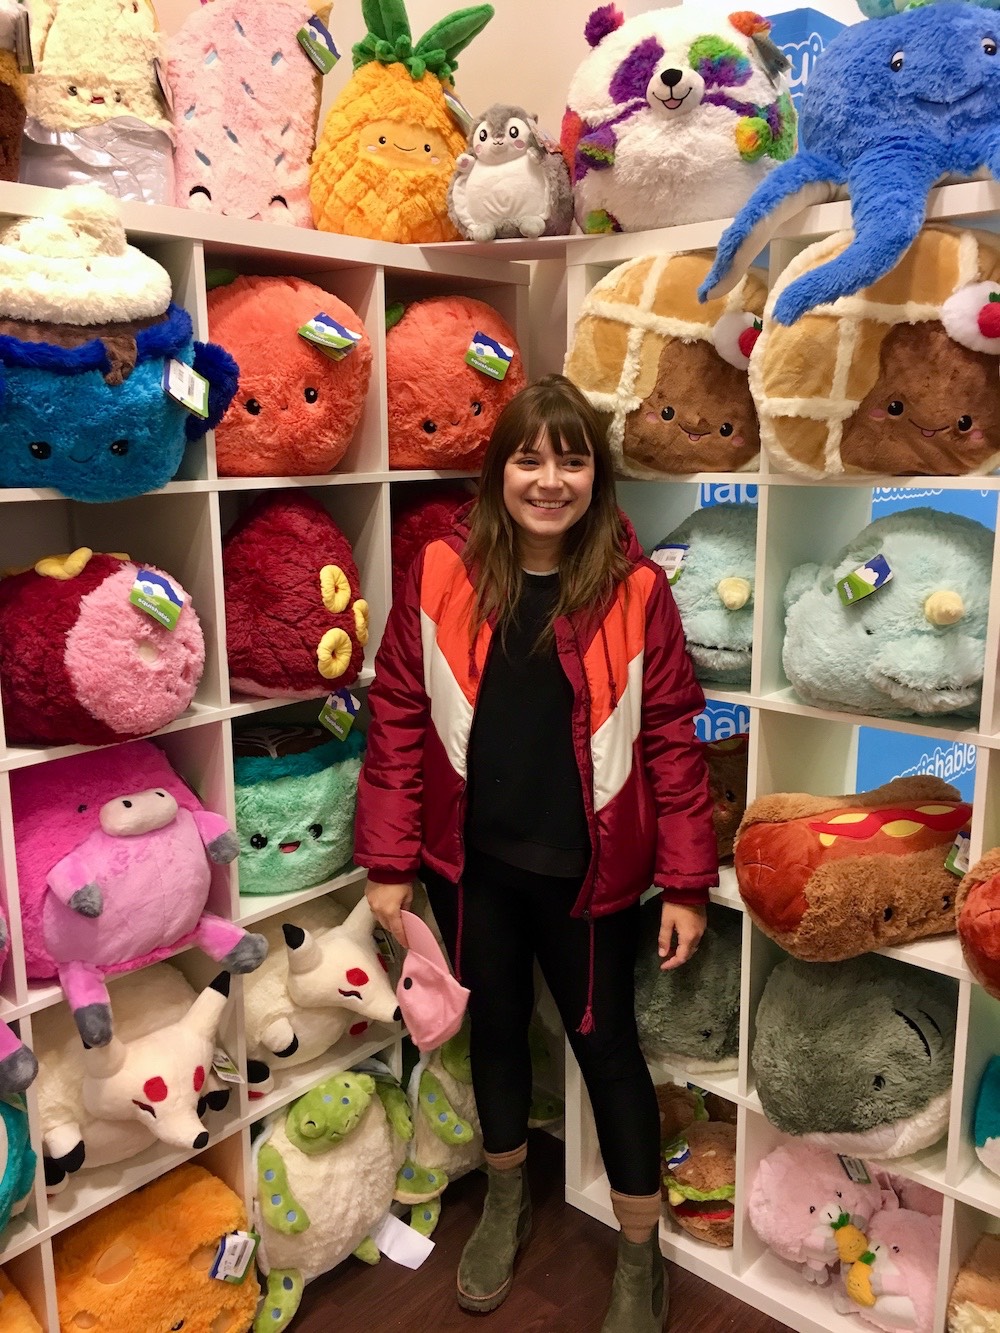 Casey at Squishable.